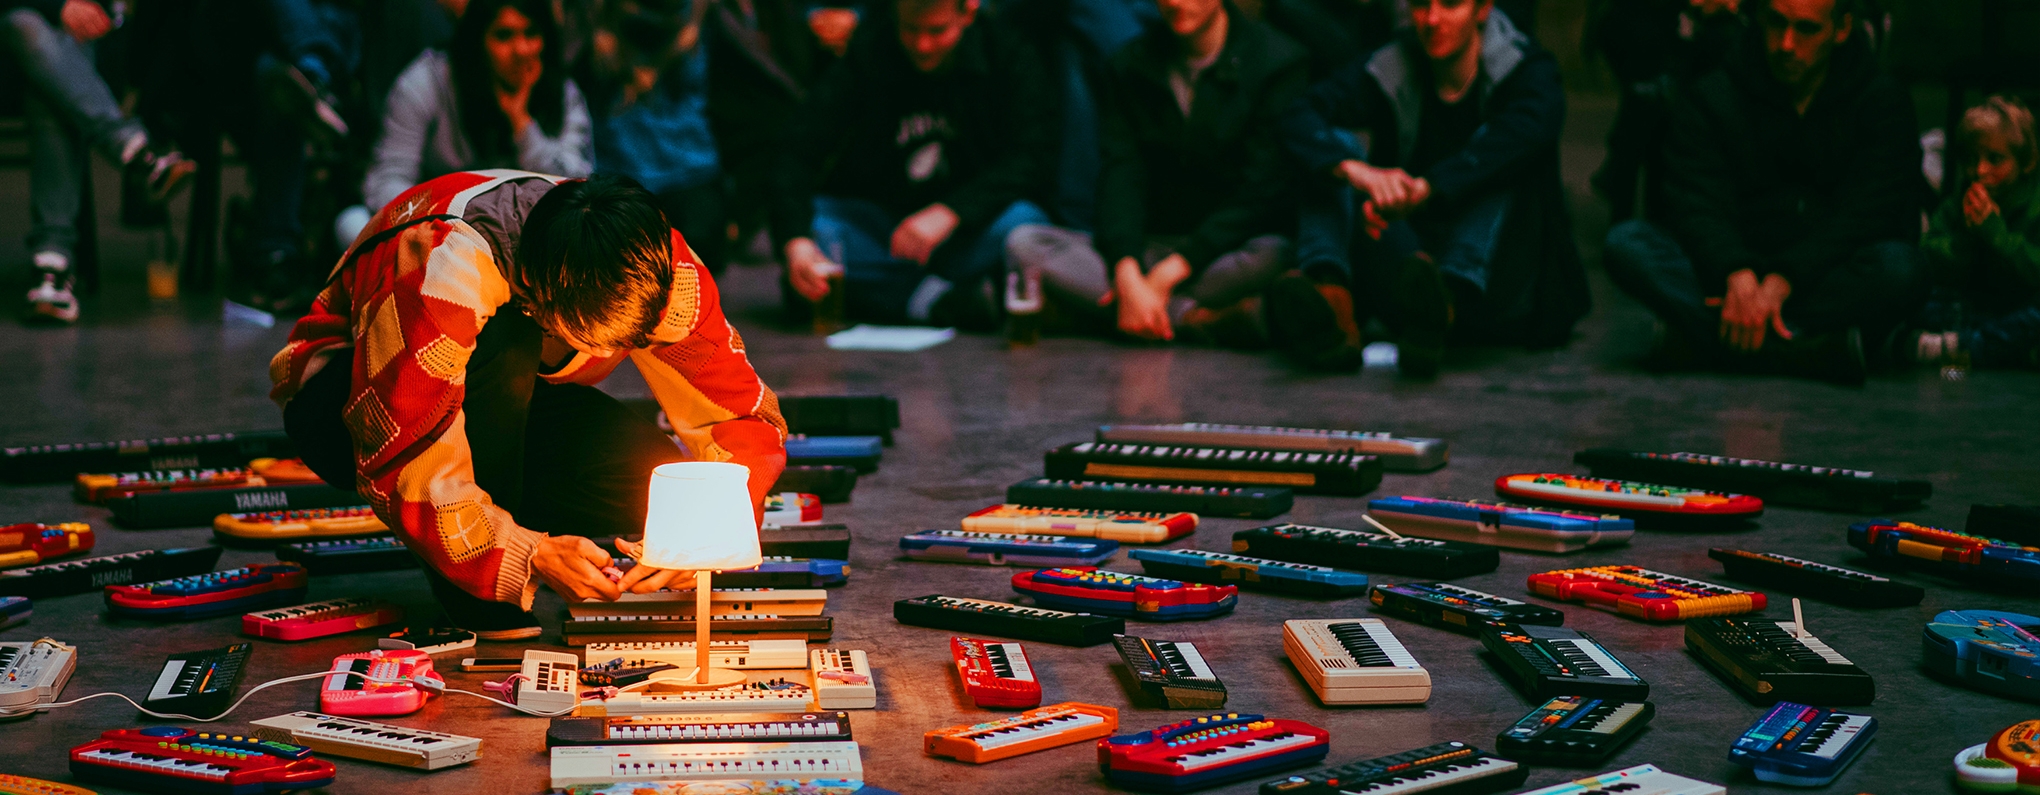 Artist crouching on floor surrounded by dozens of mini keyboards.